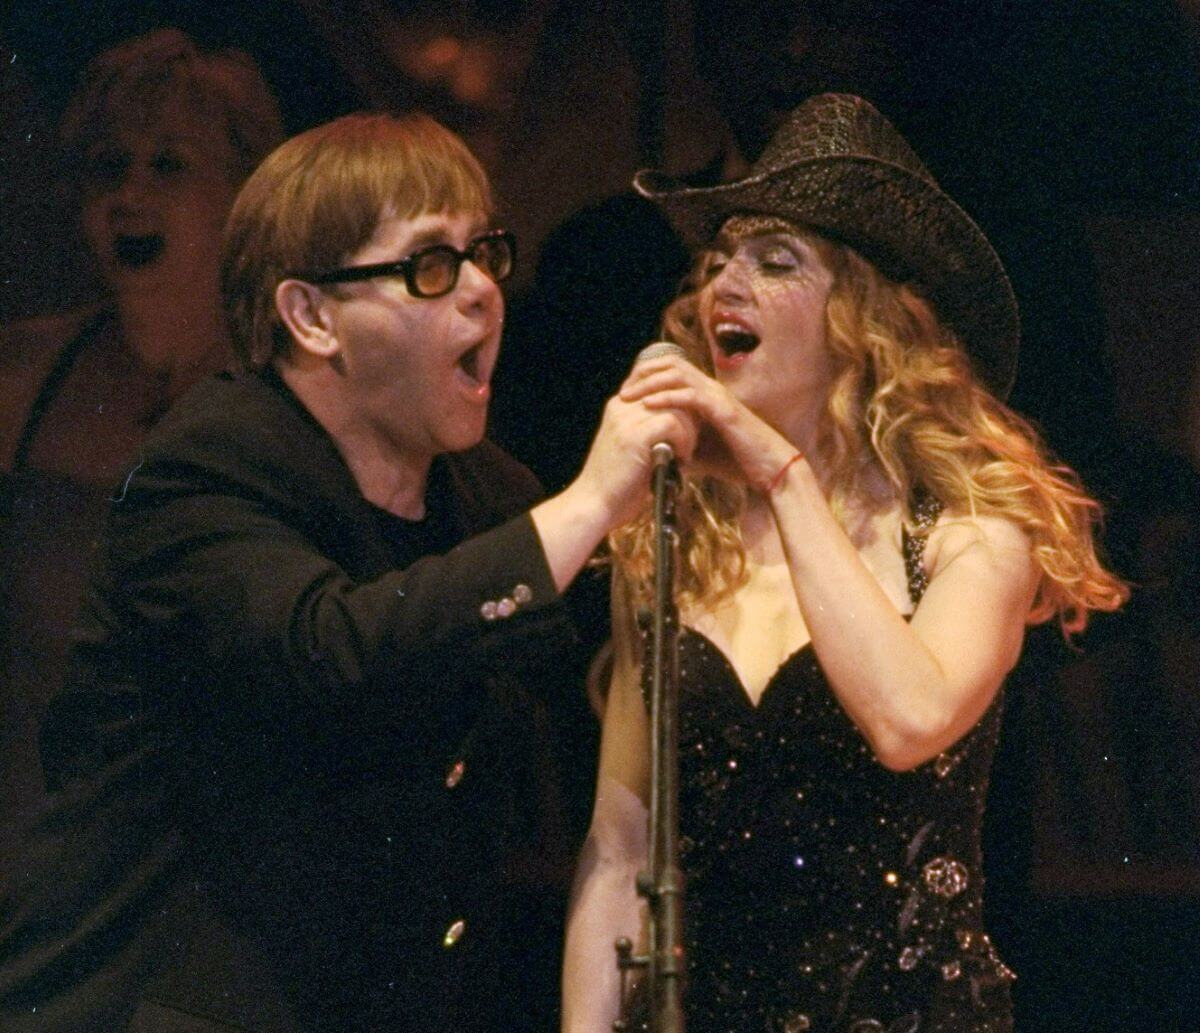 Elton John wears sunglasses and sings into a microphone with Madonna, who wears a black cowboy hat. They both hold one hand on the microphone.